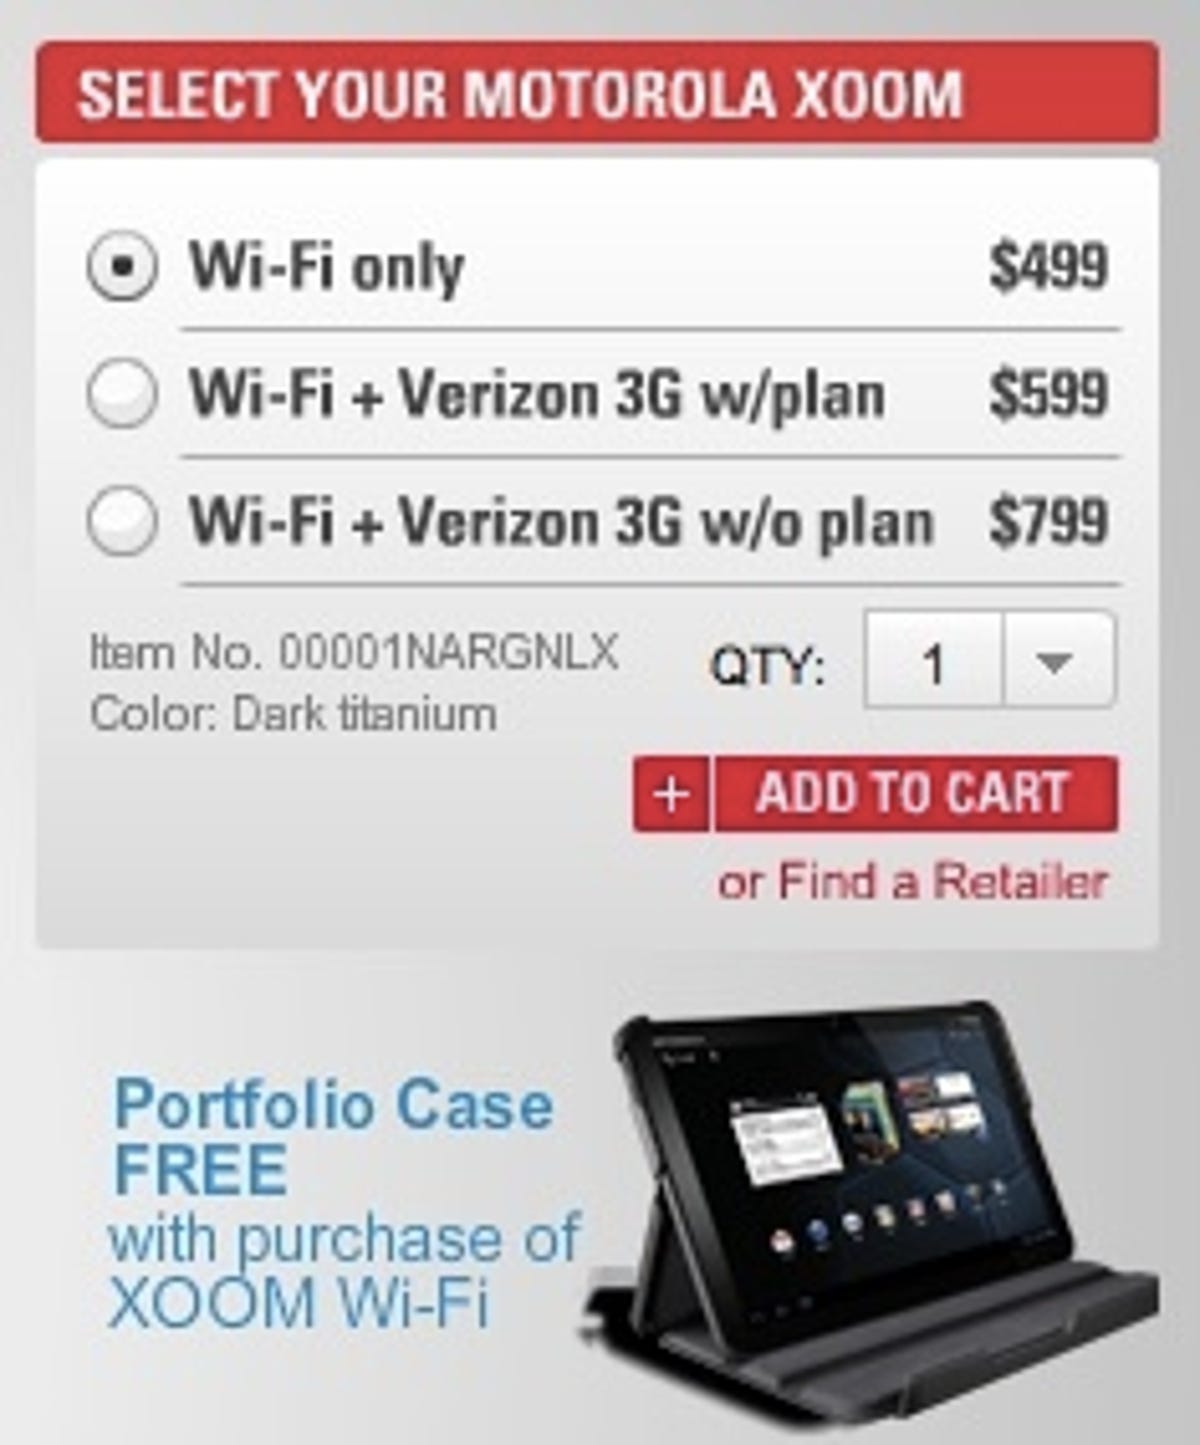 New $499 pricing for the Wi-Fi Xoom. It includes a free case.